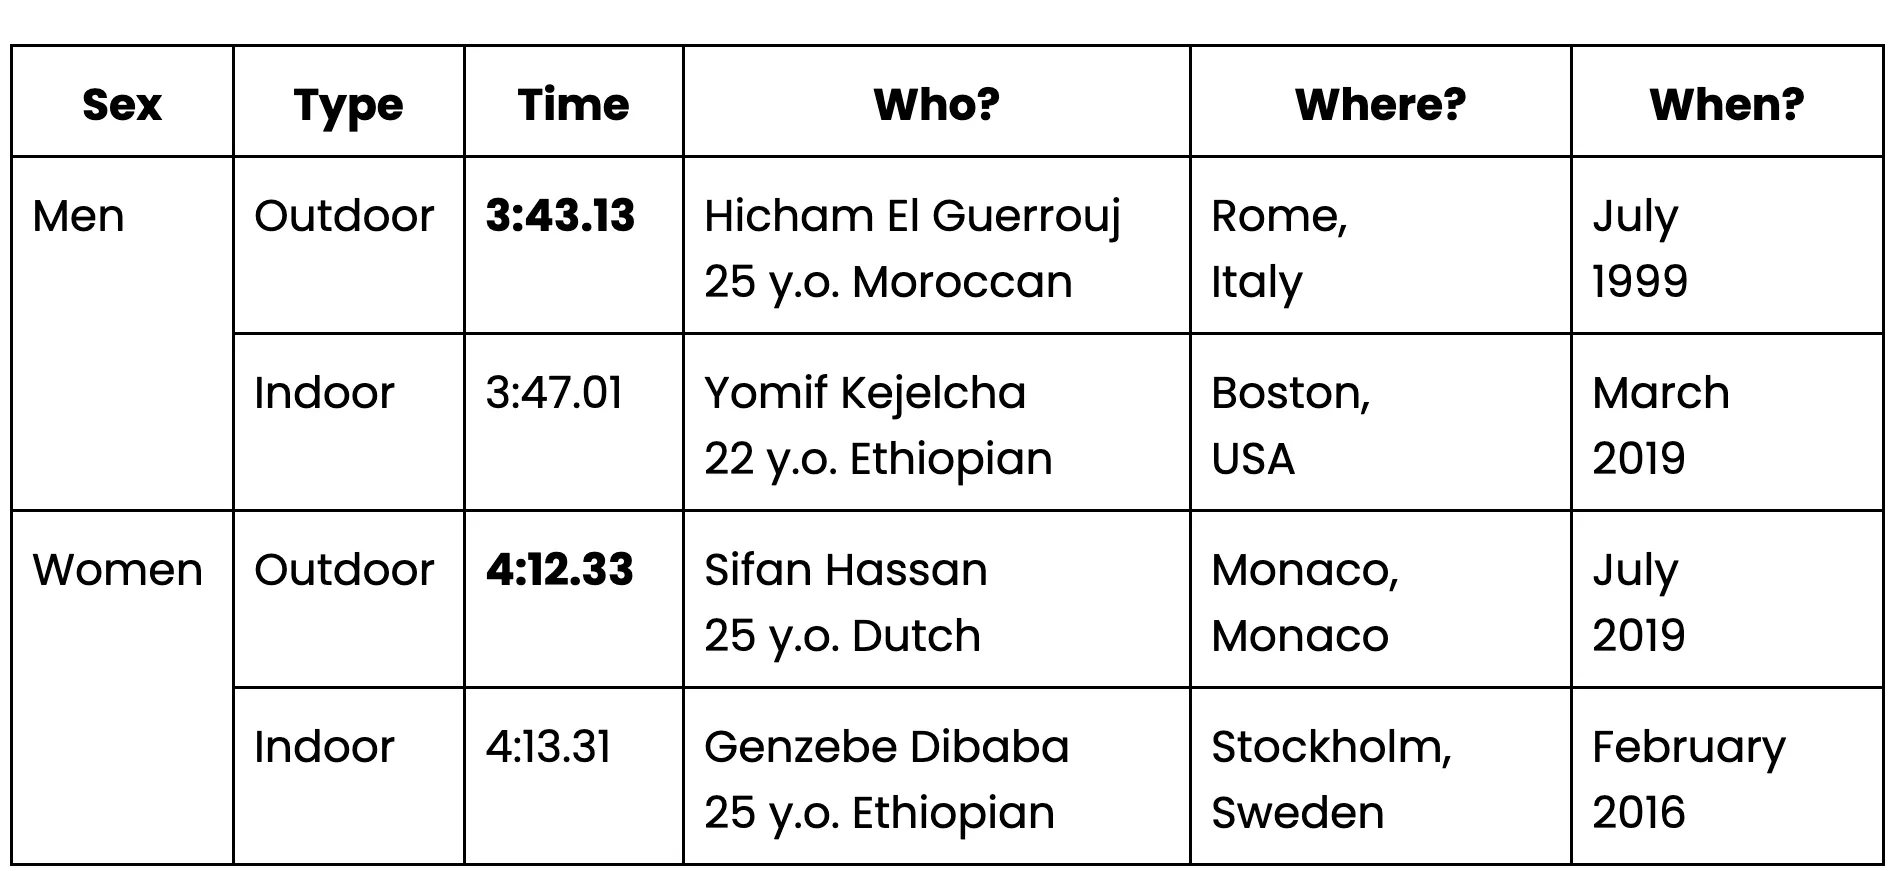 A table of Effective World Records for 1-Mile Runs: Men and Women.